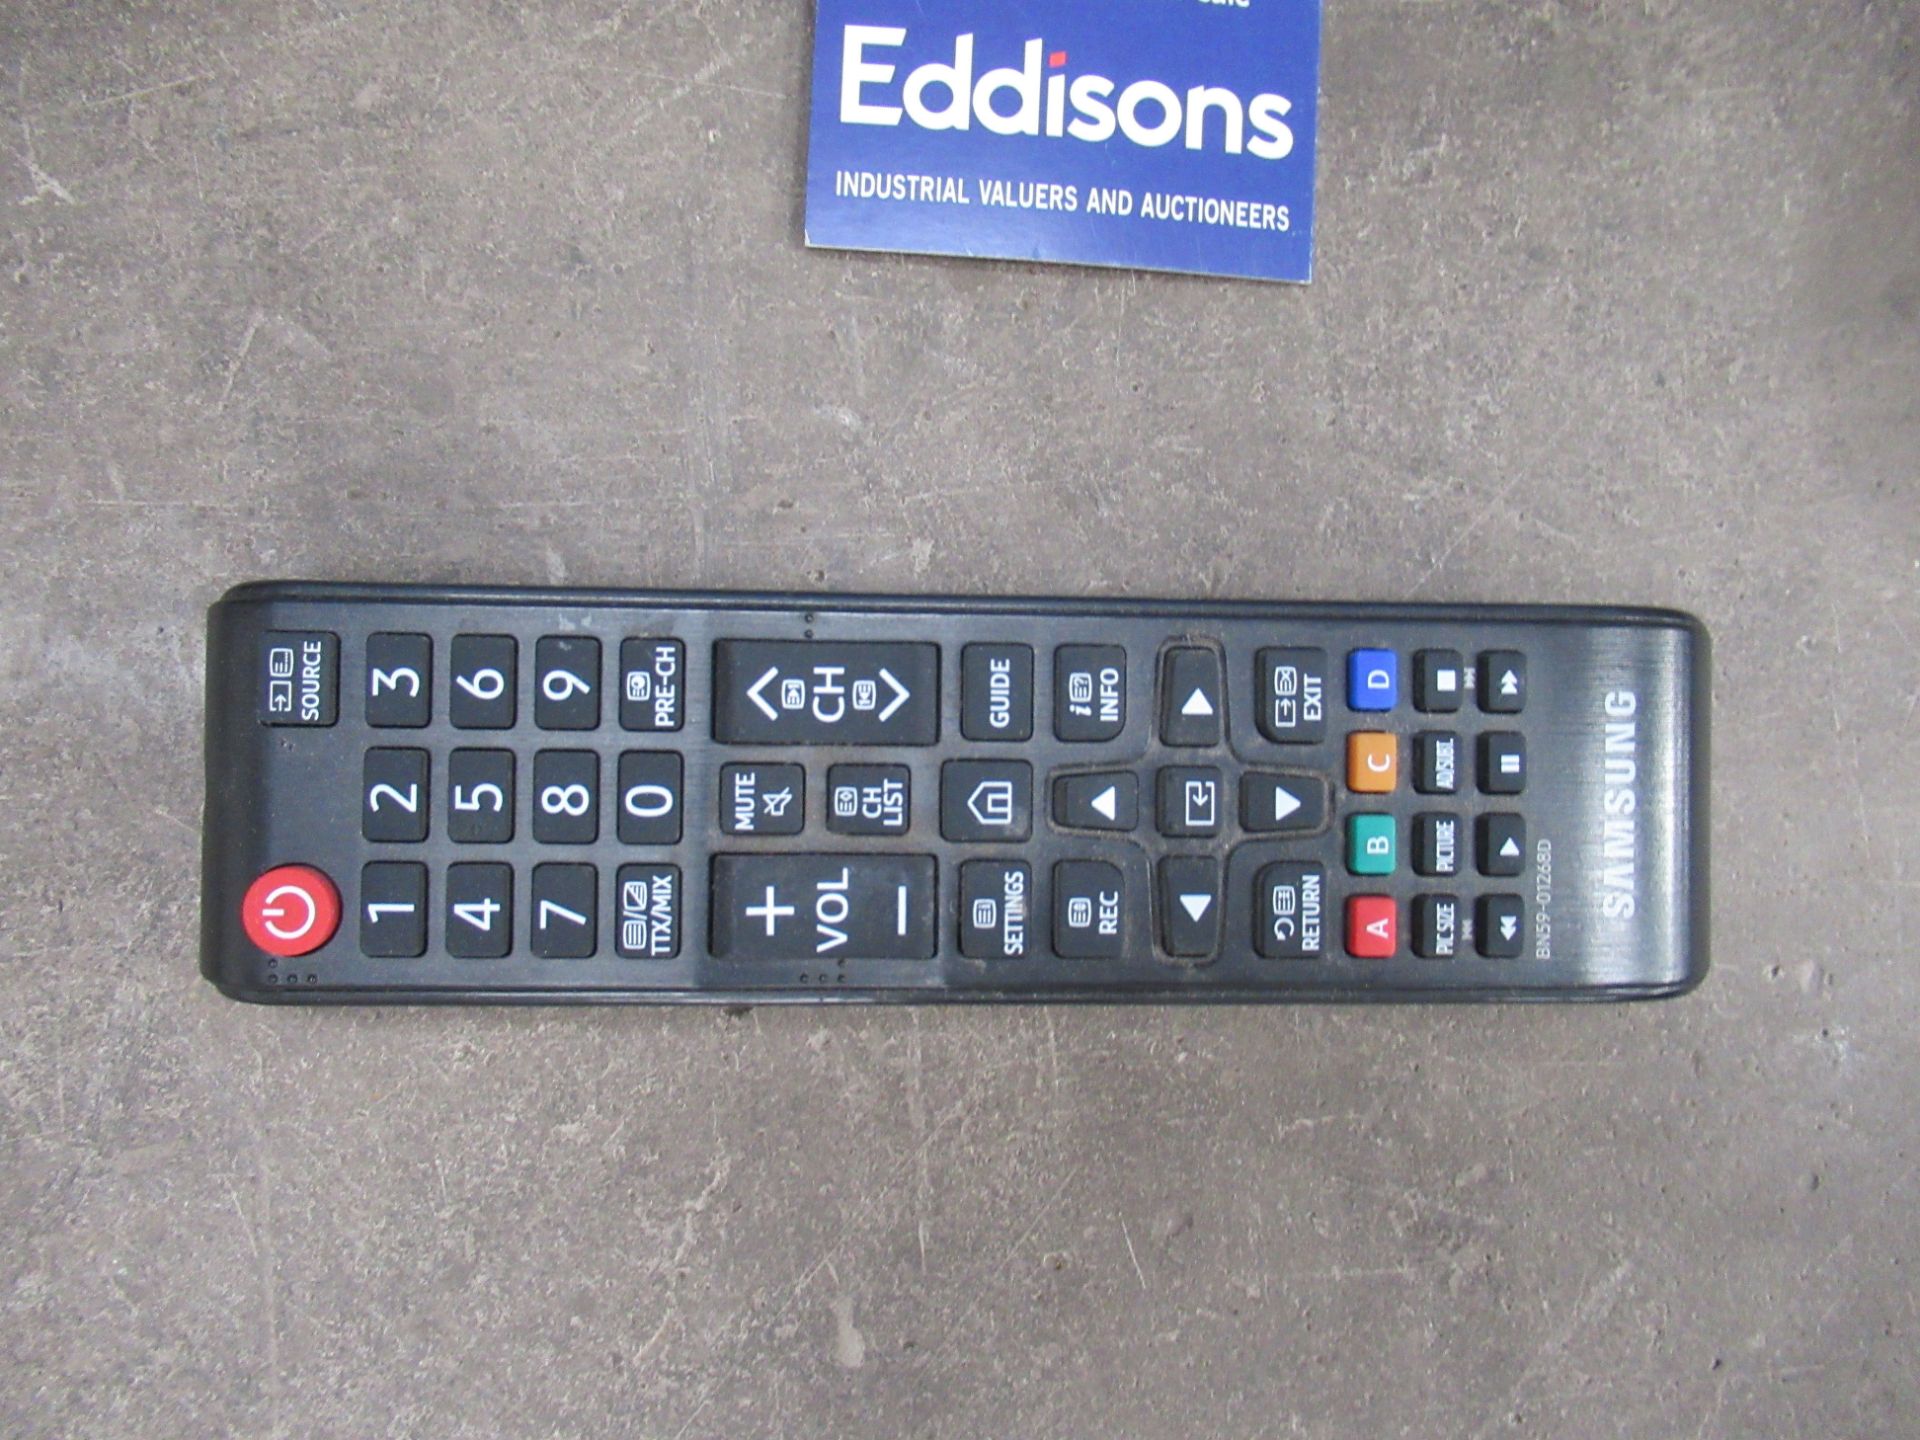 Samsung UE43M5600AK 43" Television - comes with remote and power cable - Image 5 of 5